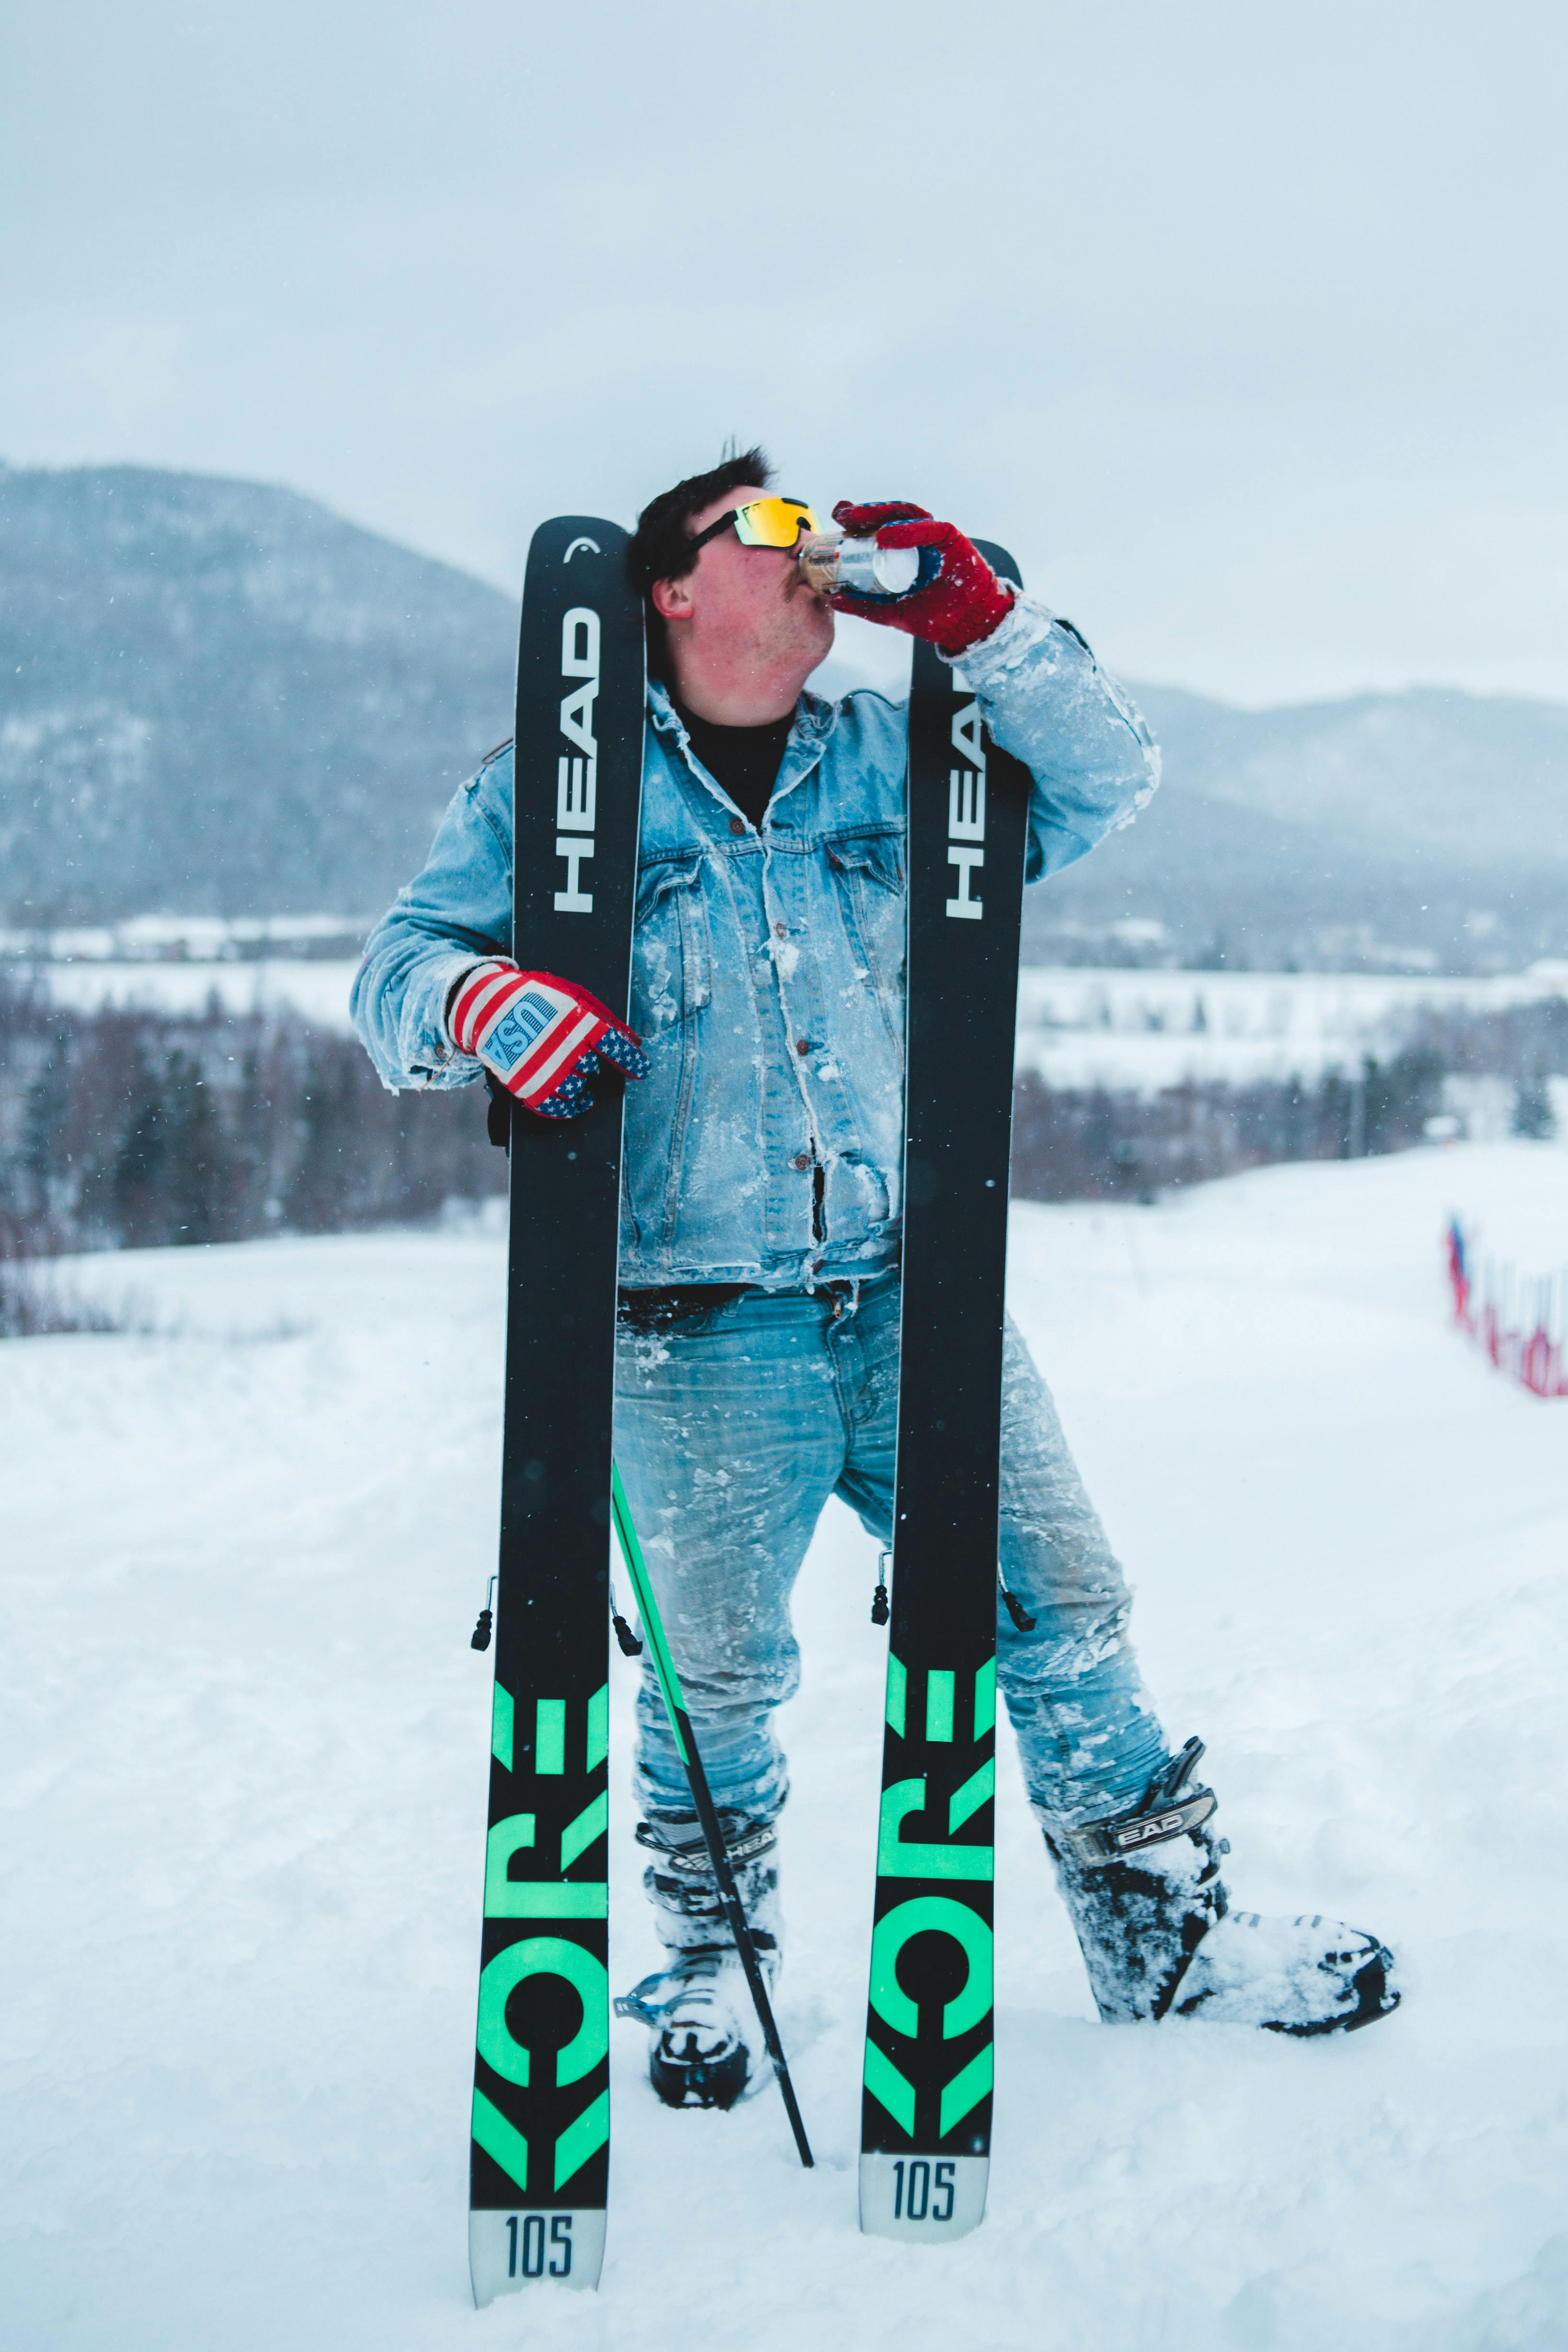 A man wearing jeans and a denim jacket holds up skis while drinking a beer